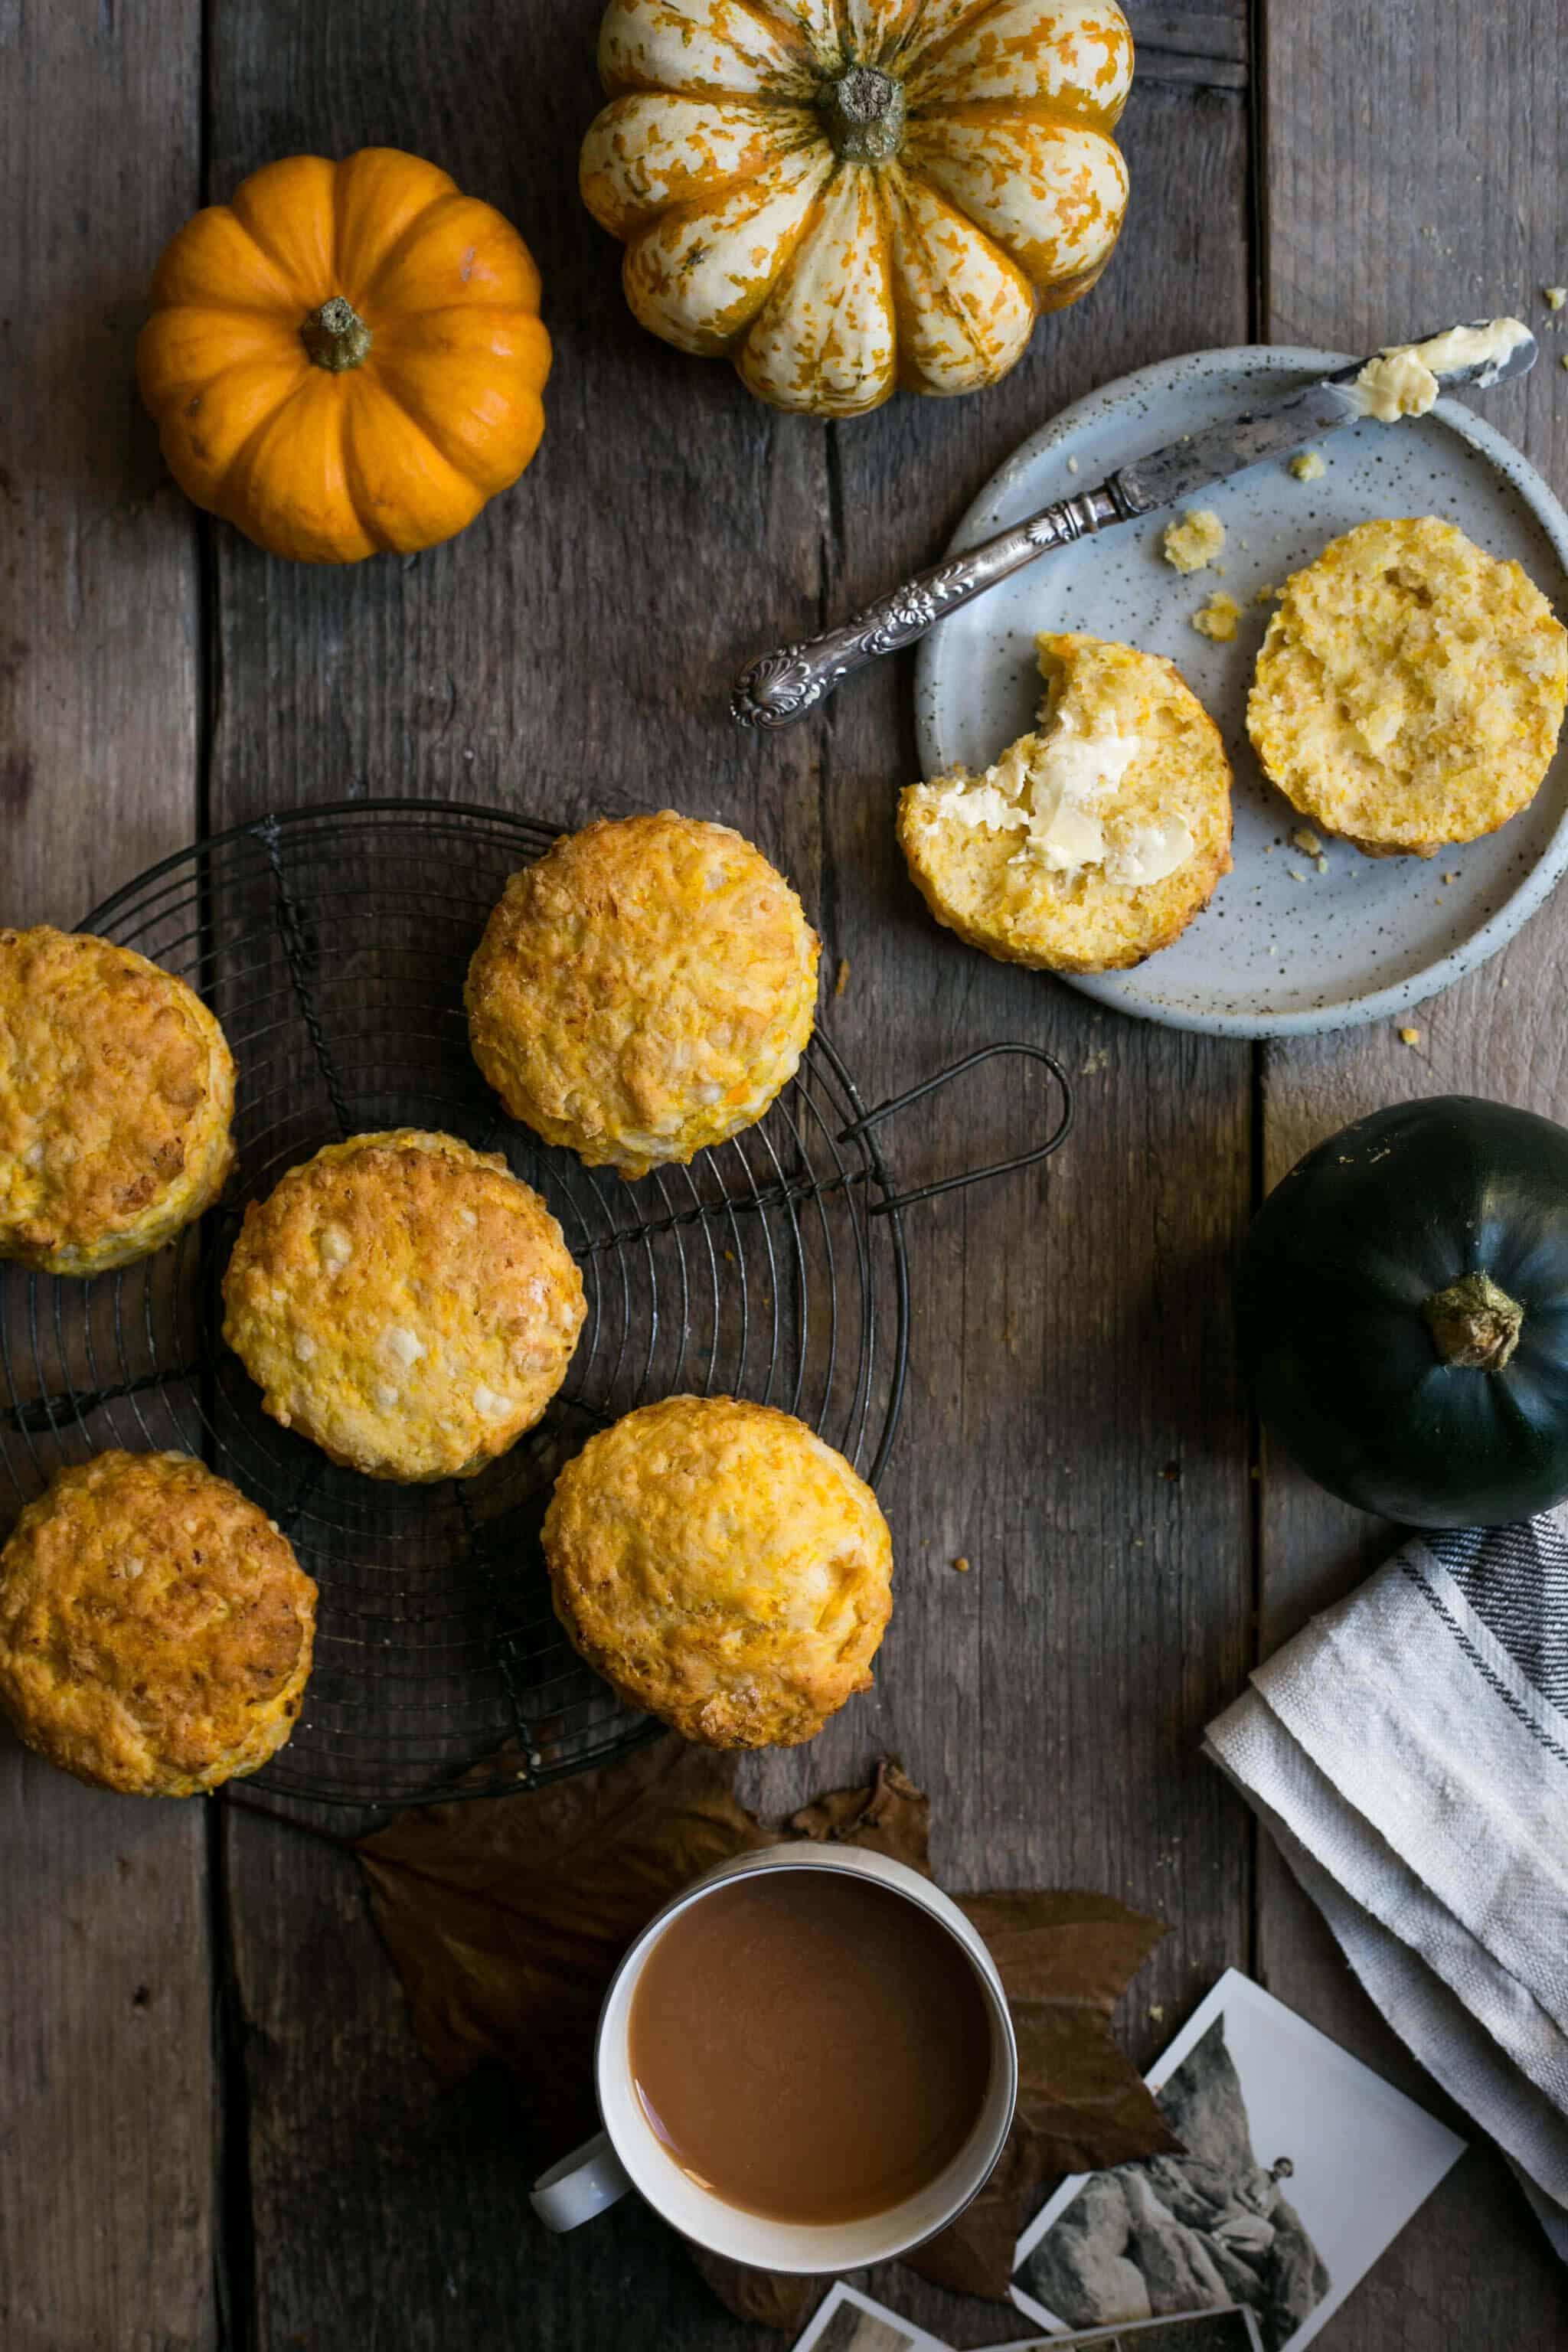 Pumpkin Scones with cheese. Traditional classic with a modern twist! Vegan option! #pumpkin #scones | via @annabanana.co